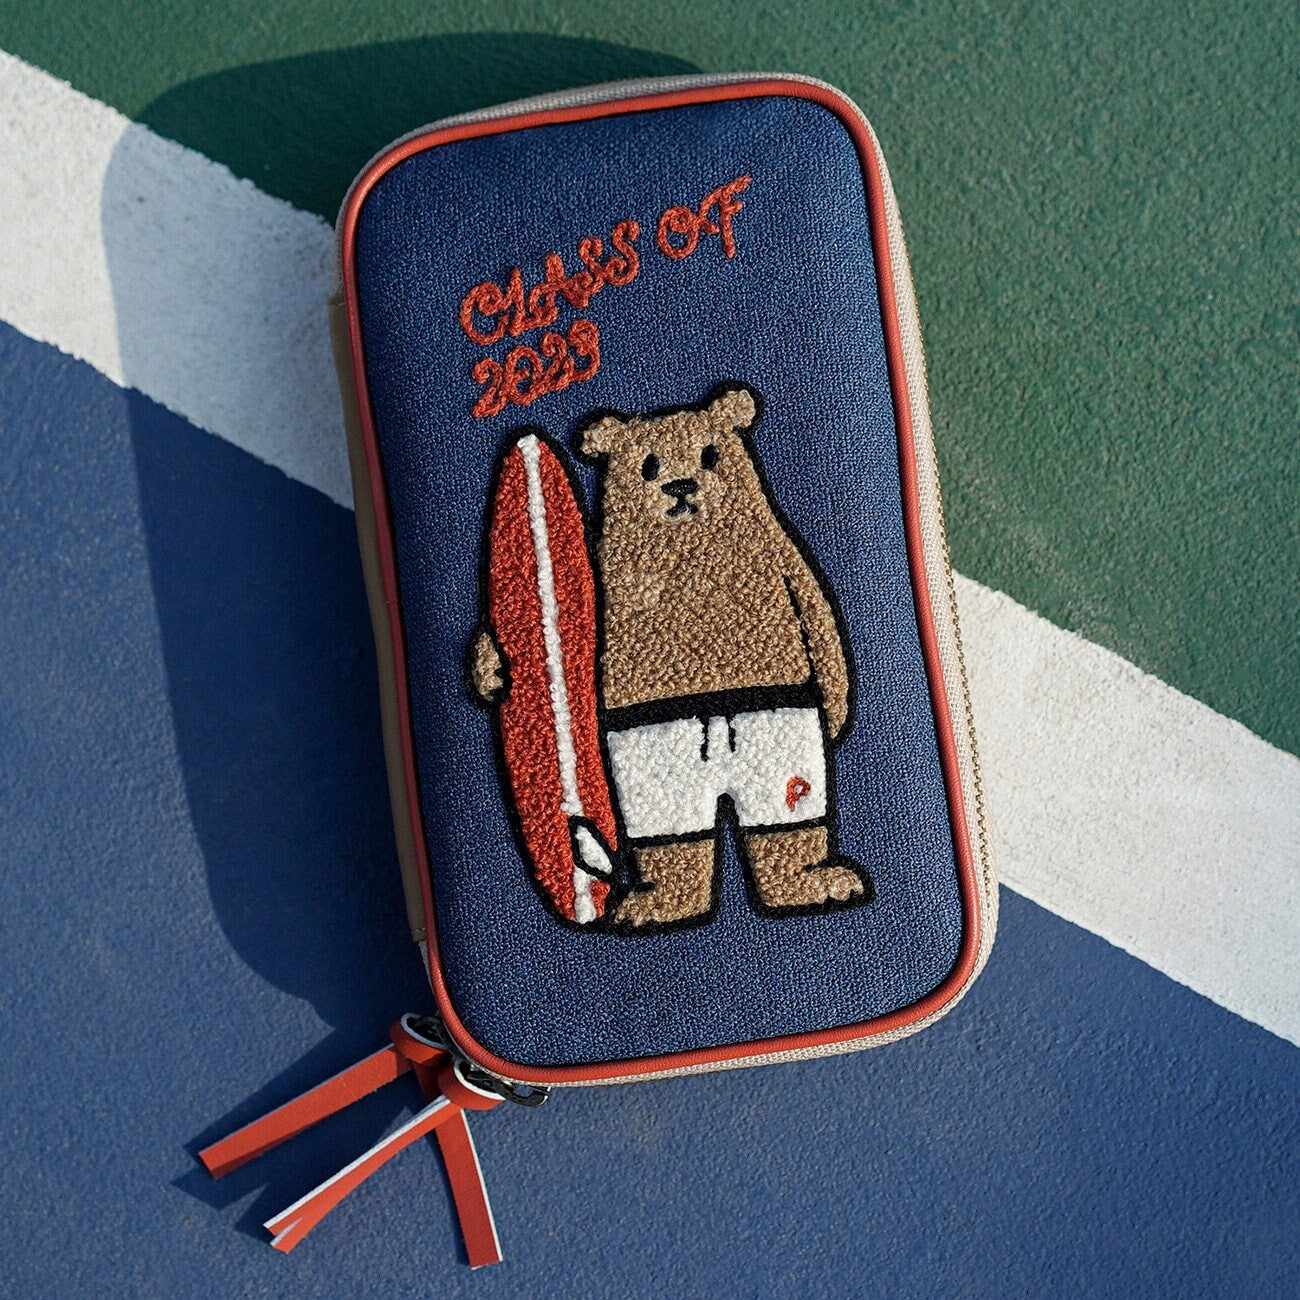 Embroidered Bear Pen Case Large Capacity Handmade Storage Bag Cotton PU Covered Zipper Pouch Makeup Travel Bag Stationary Bag Unique Gift